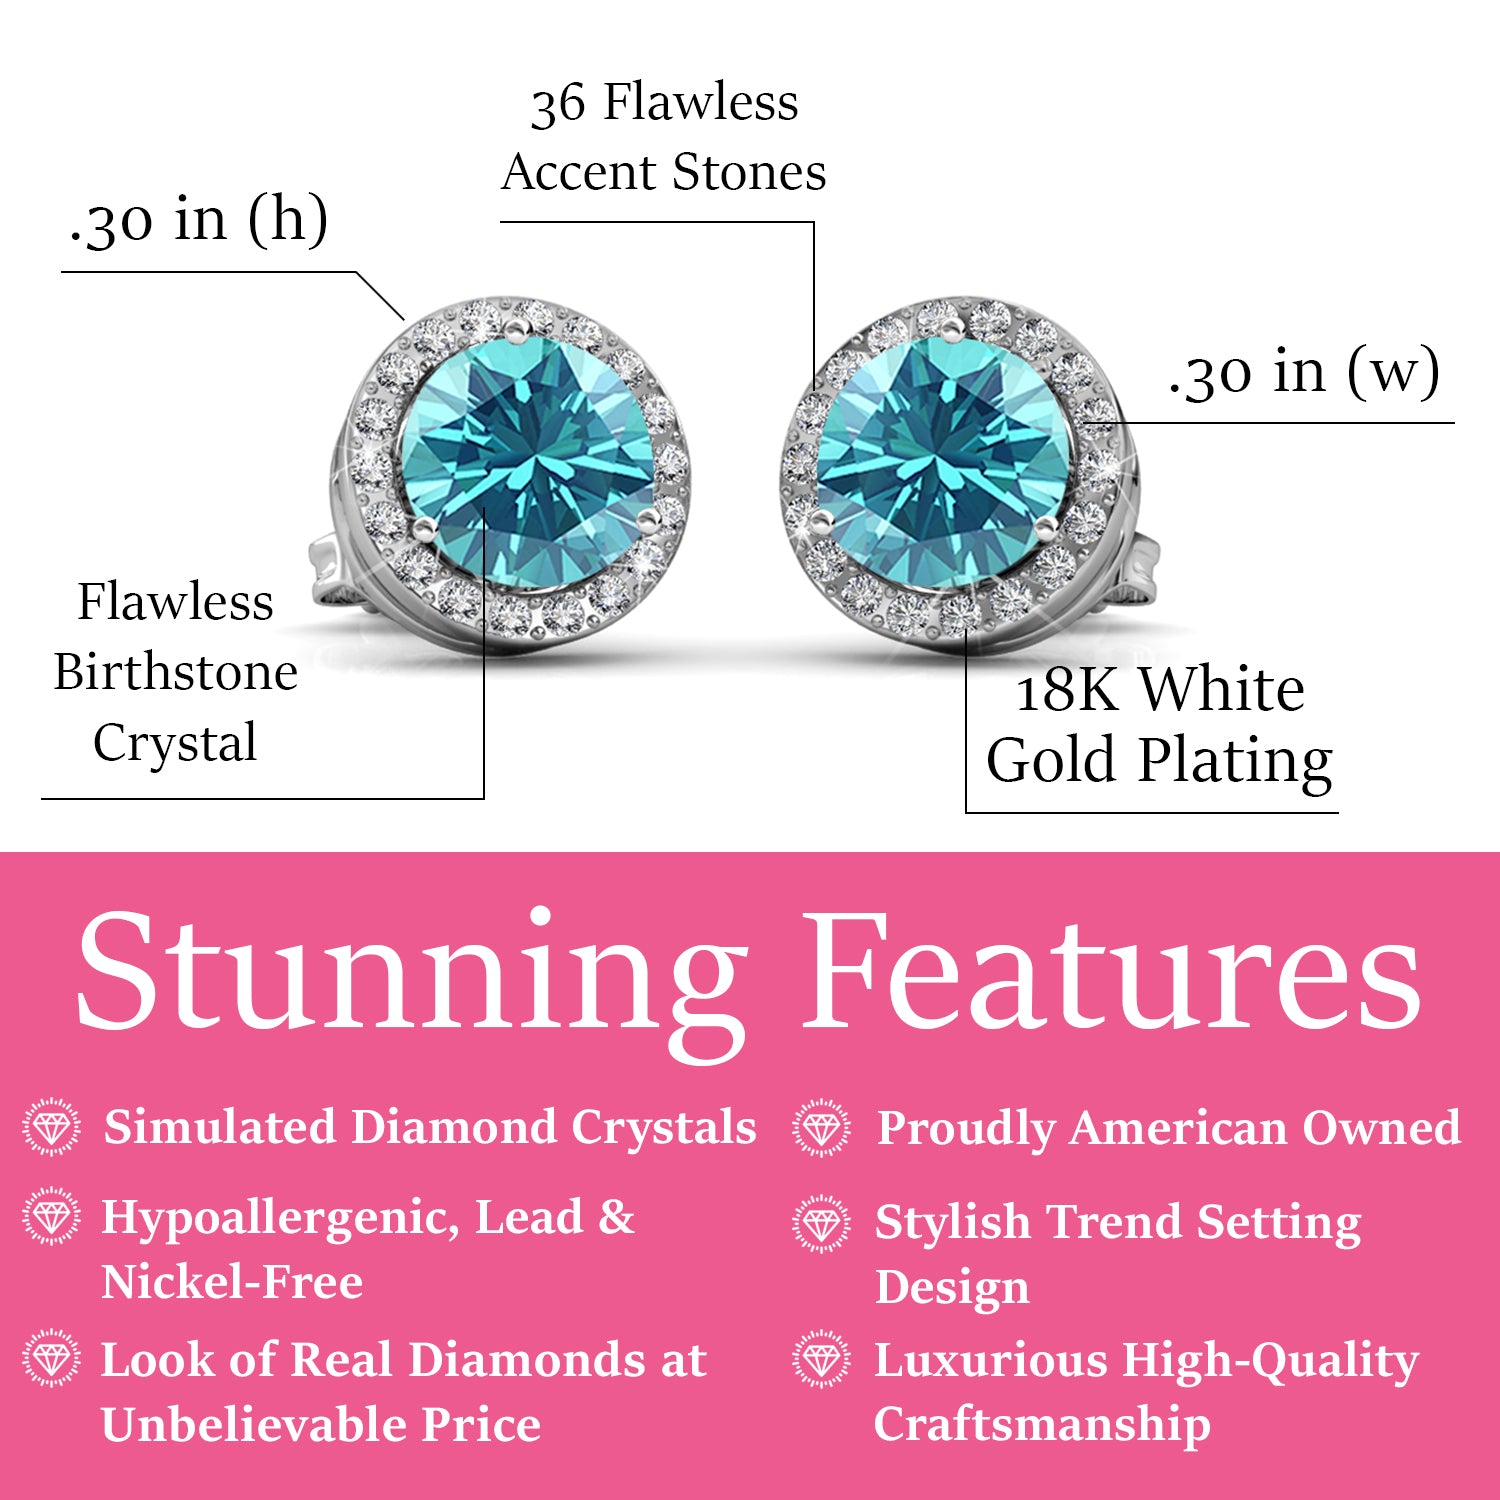 Royal March Birthstone Aquamarine Earrings, 18k White Gold Plated Silver Halo Earrings with Round Cut Crystals